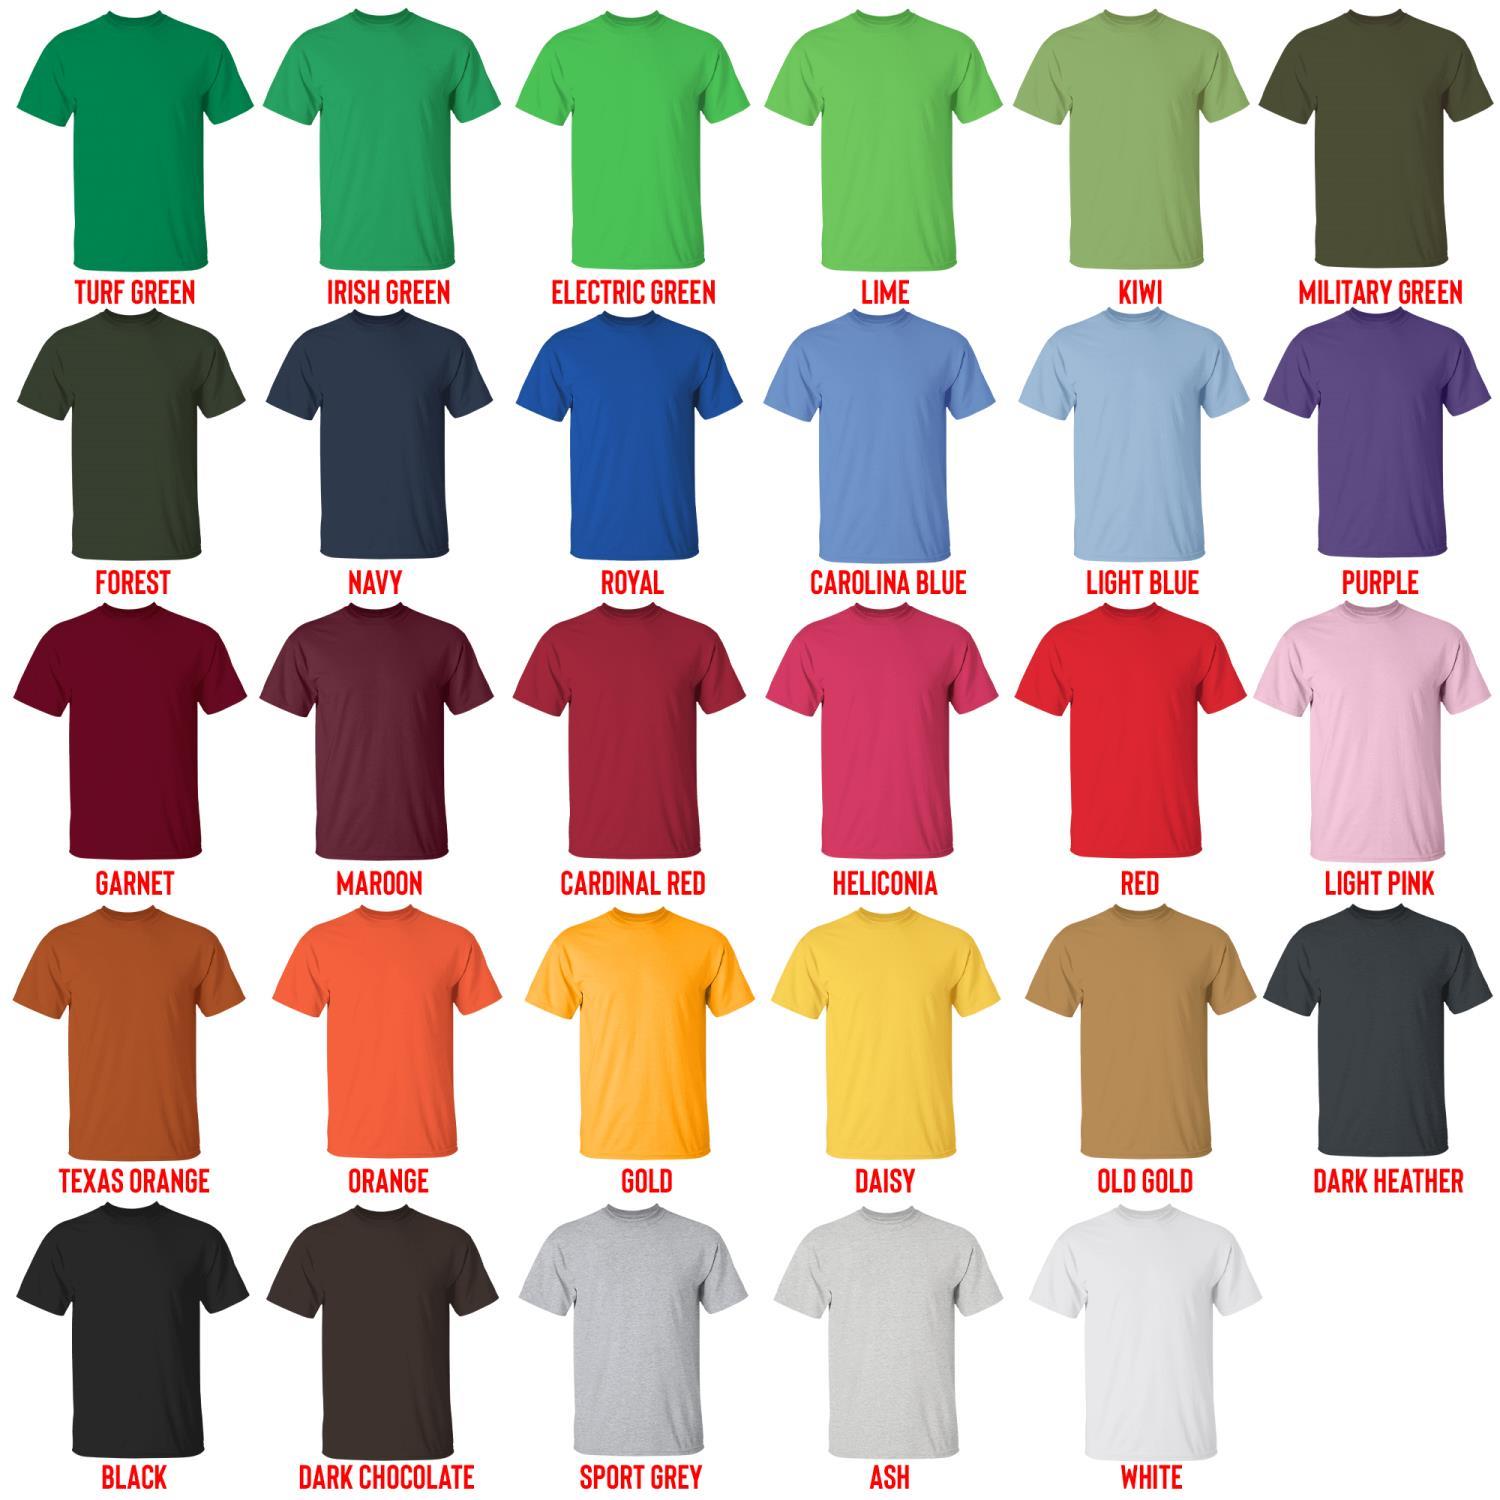 t shirt color chart - Jessii Vee Store